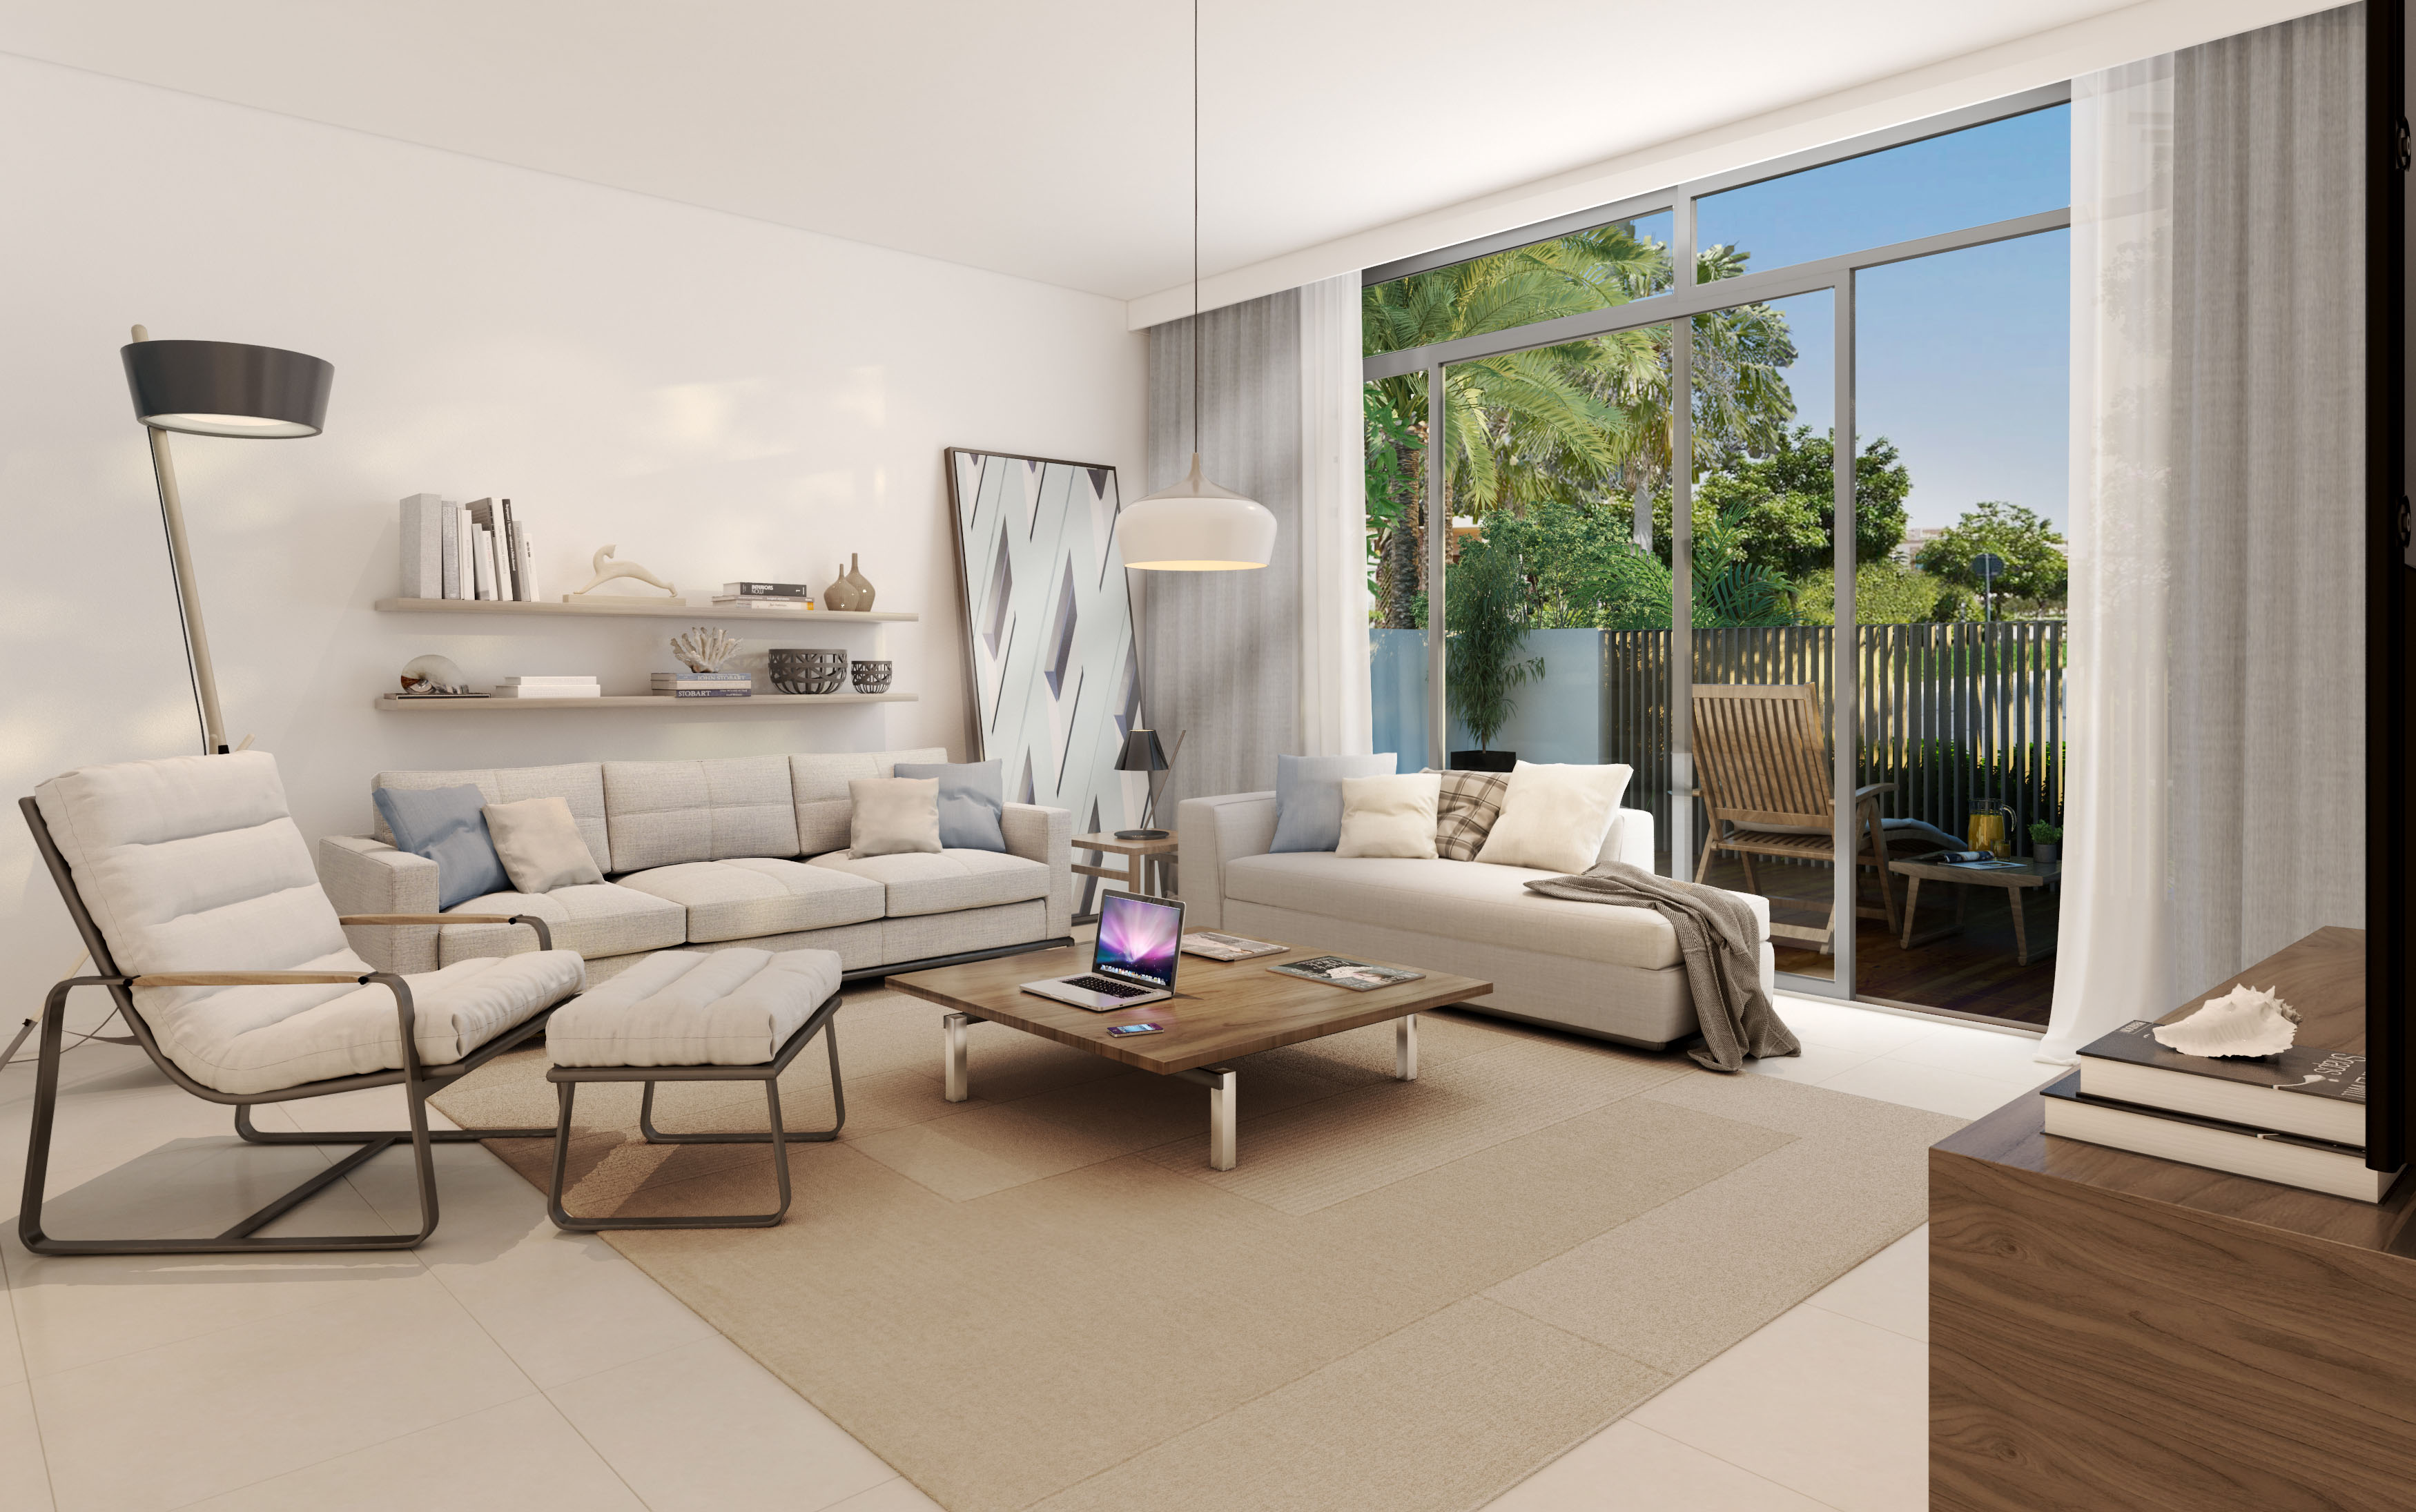 New development featuring interconnected boulevards to launch in Dubai ...